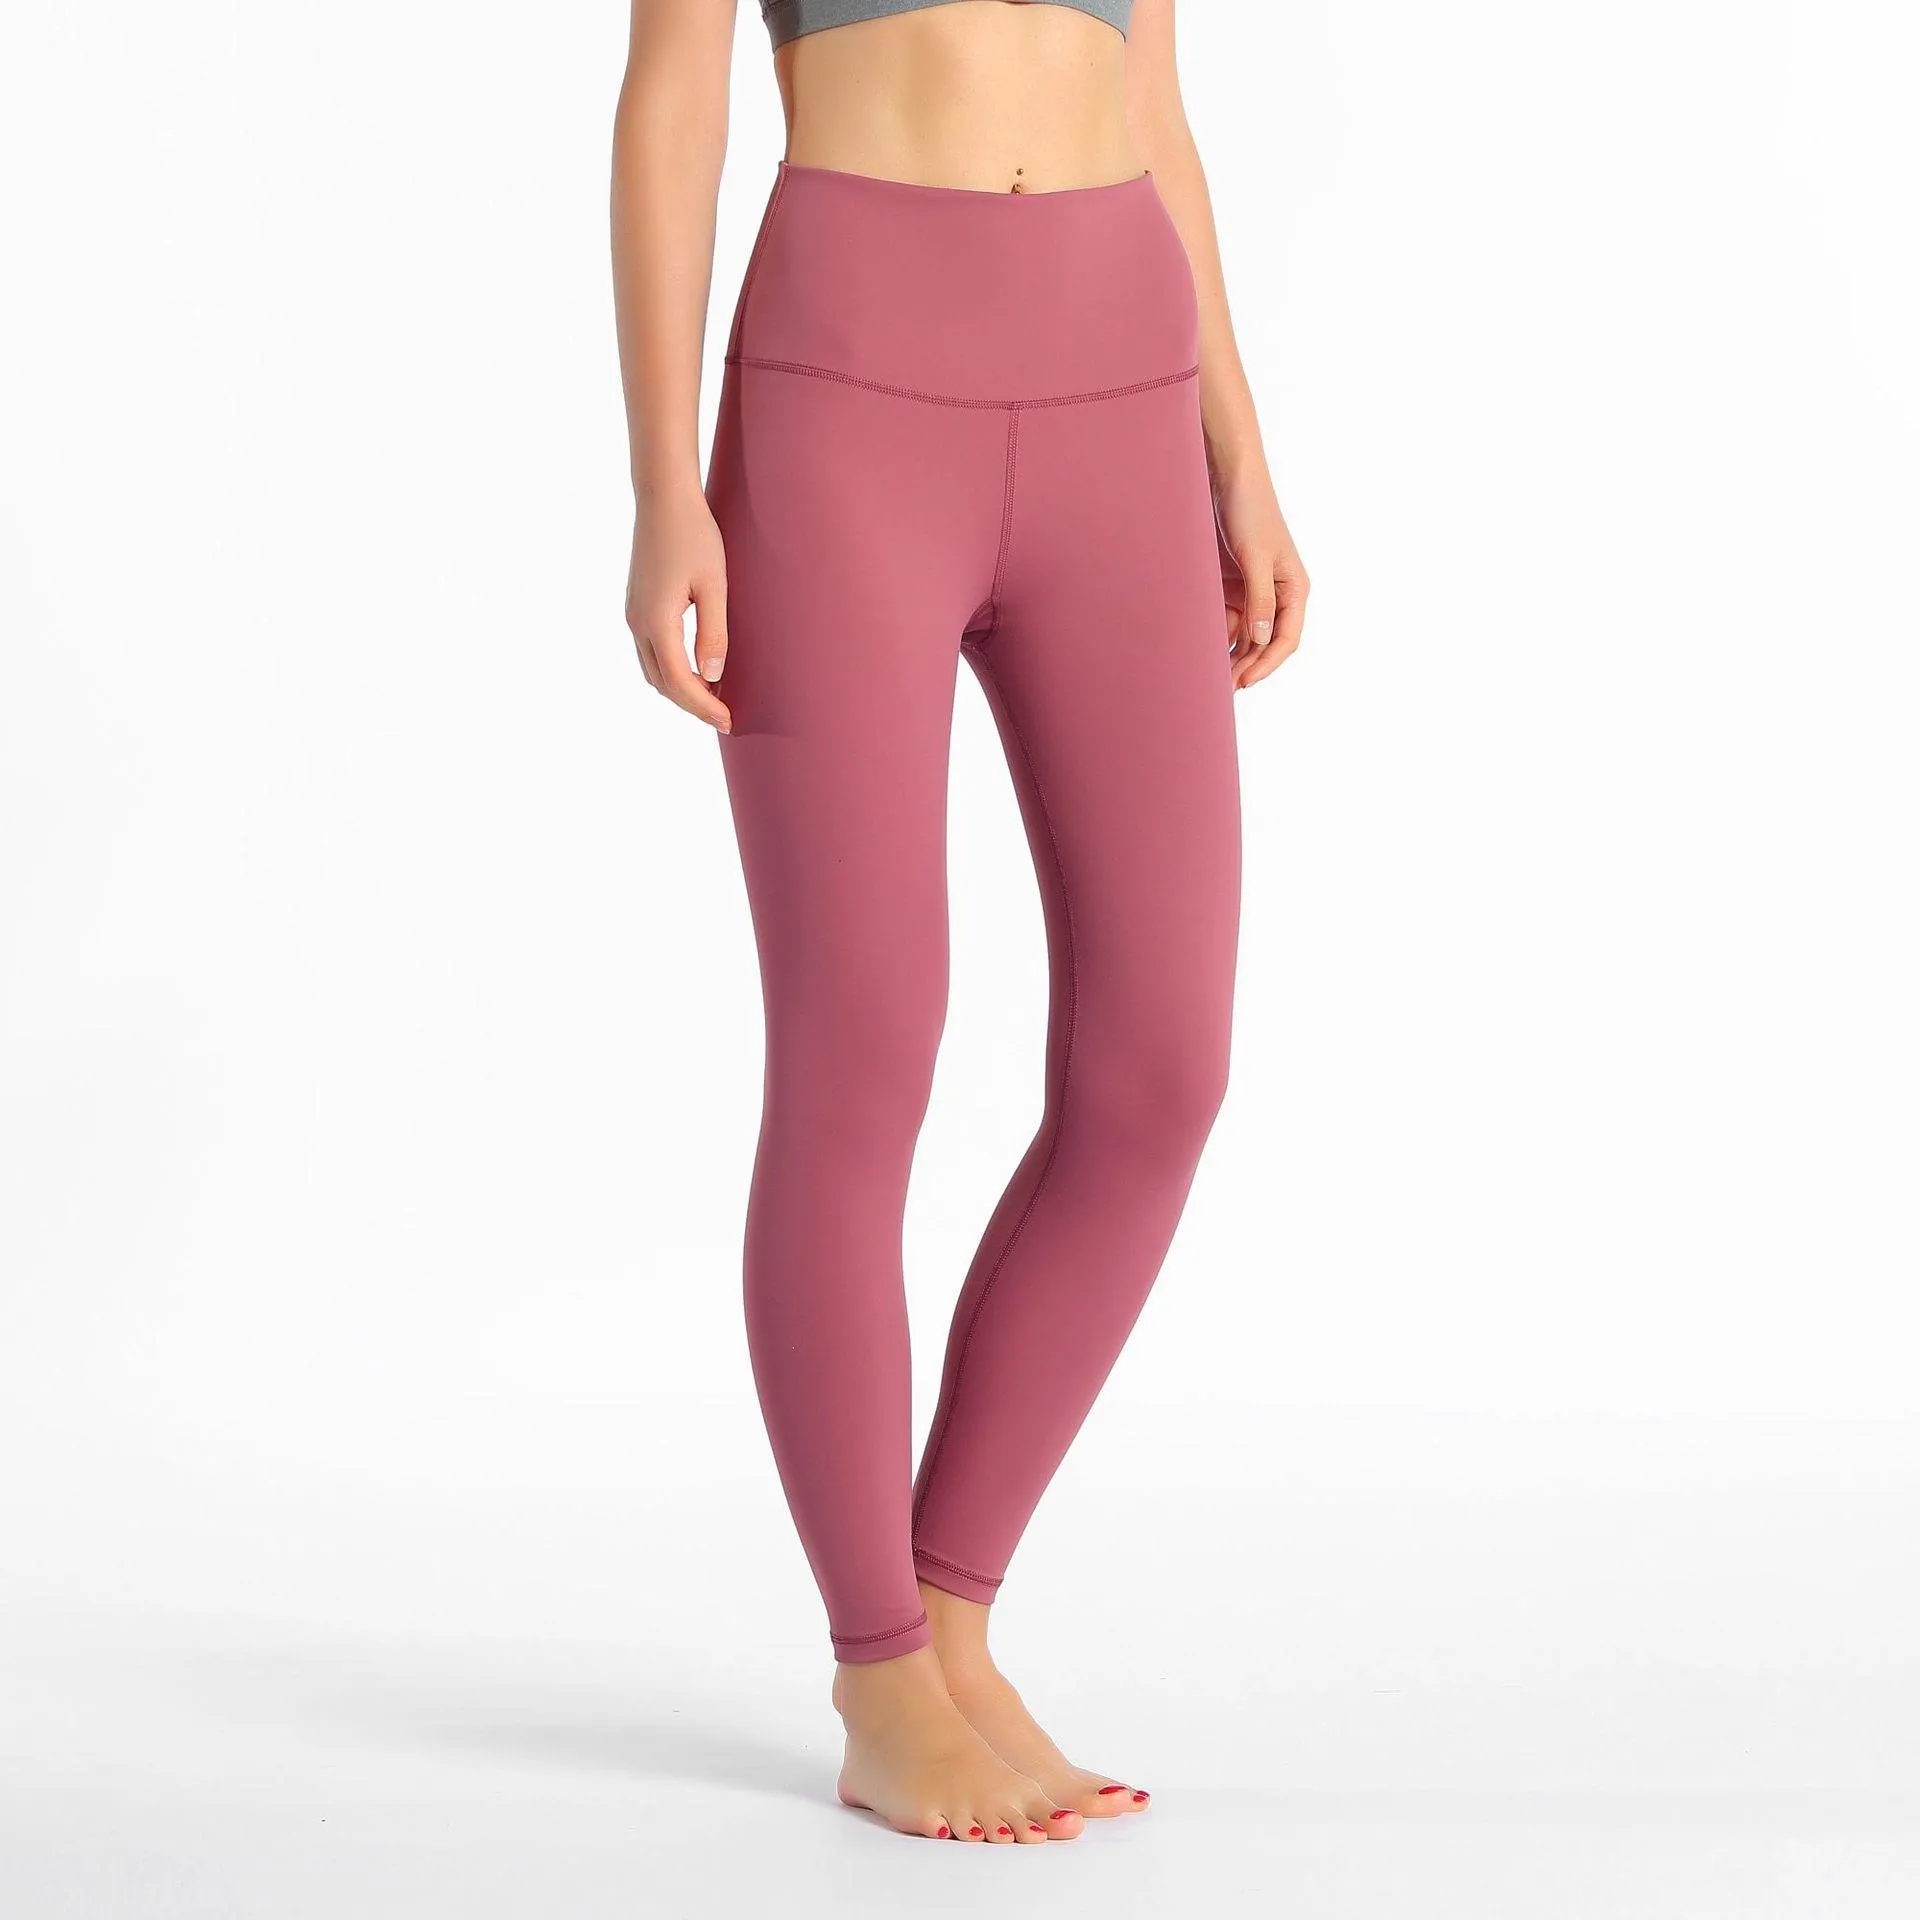 High Waist Balance Collection Yoga Pants For Women And Girls Solid